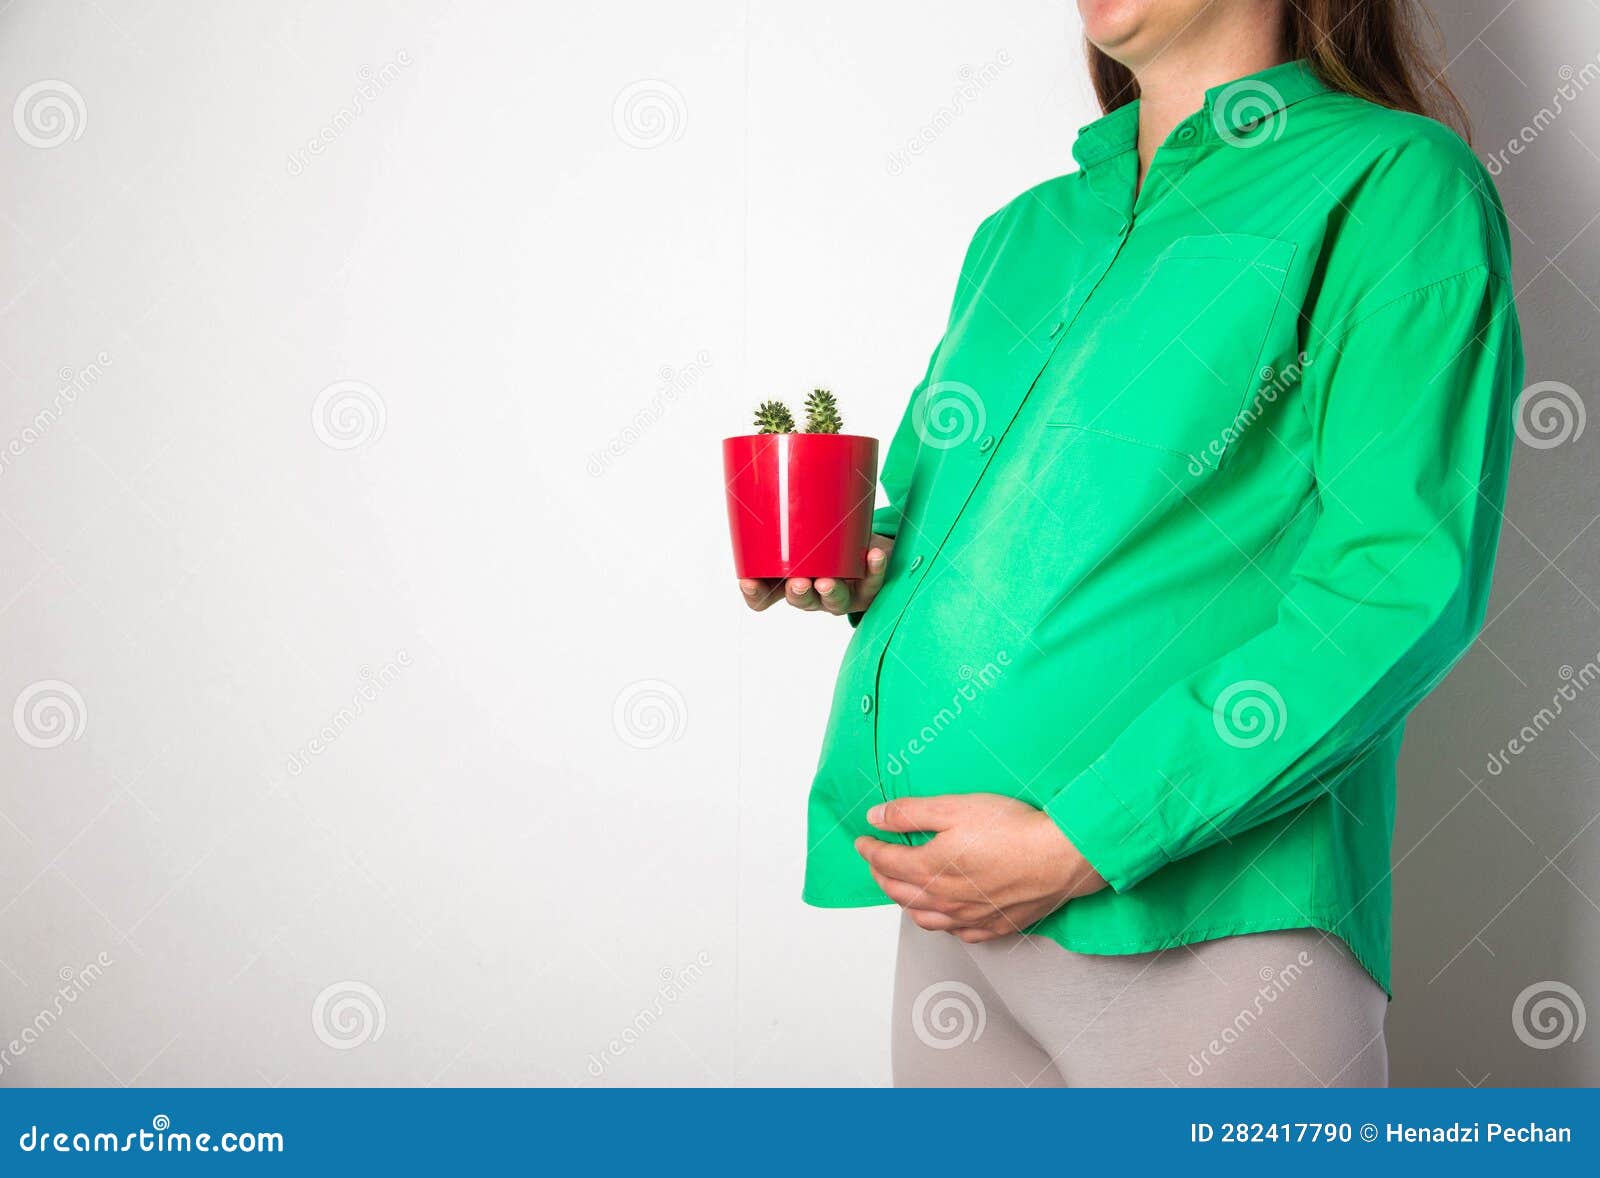 a pregnant girl in a green blouse holds a red cactus pot. coznept of cutting pains and colic in the abdomen in pregnant